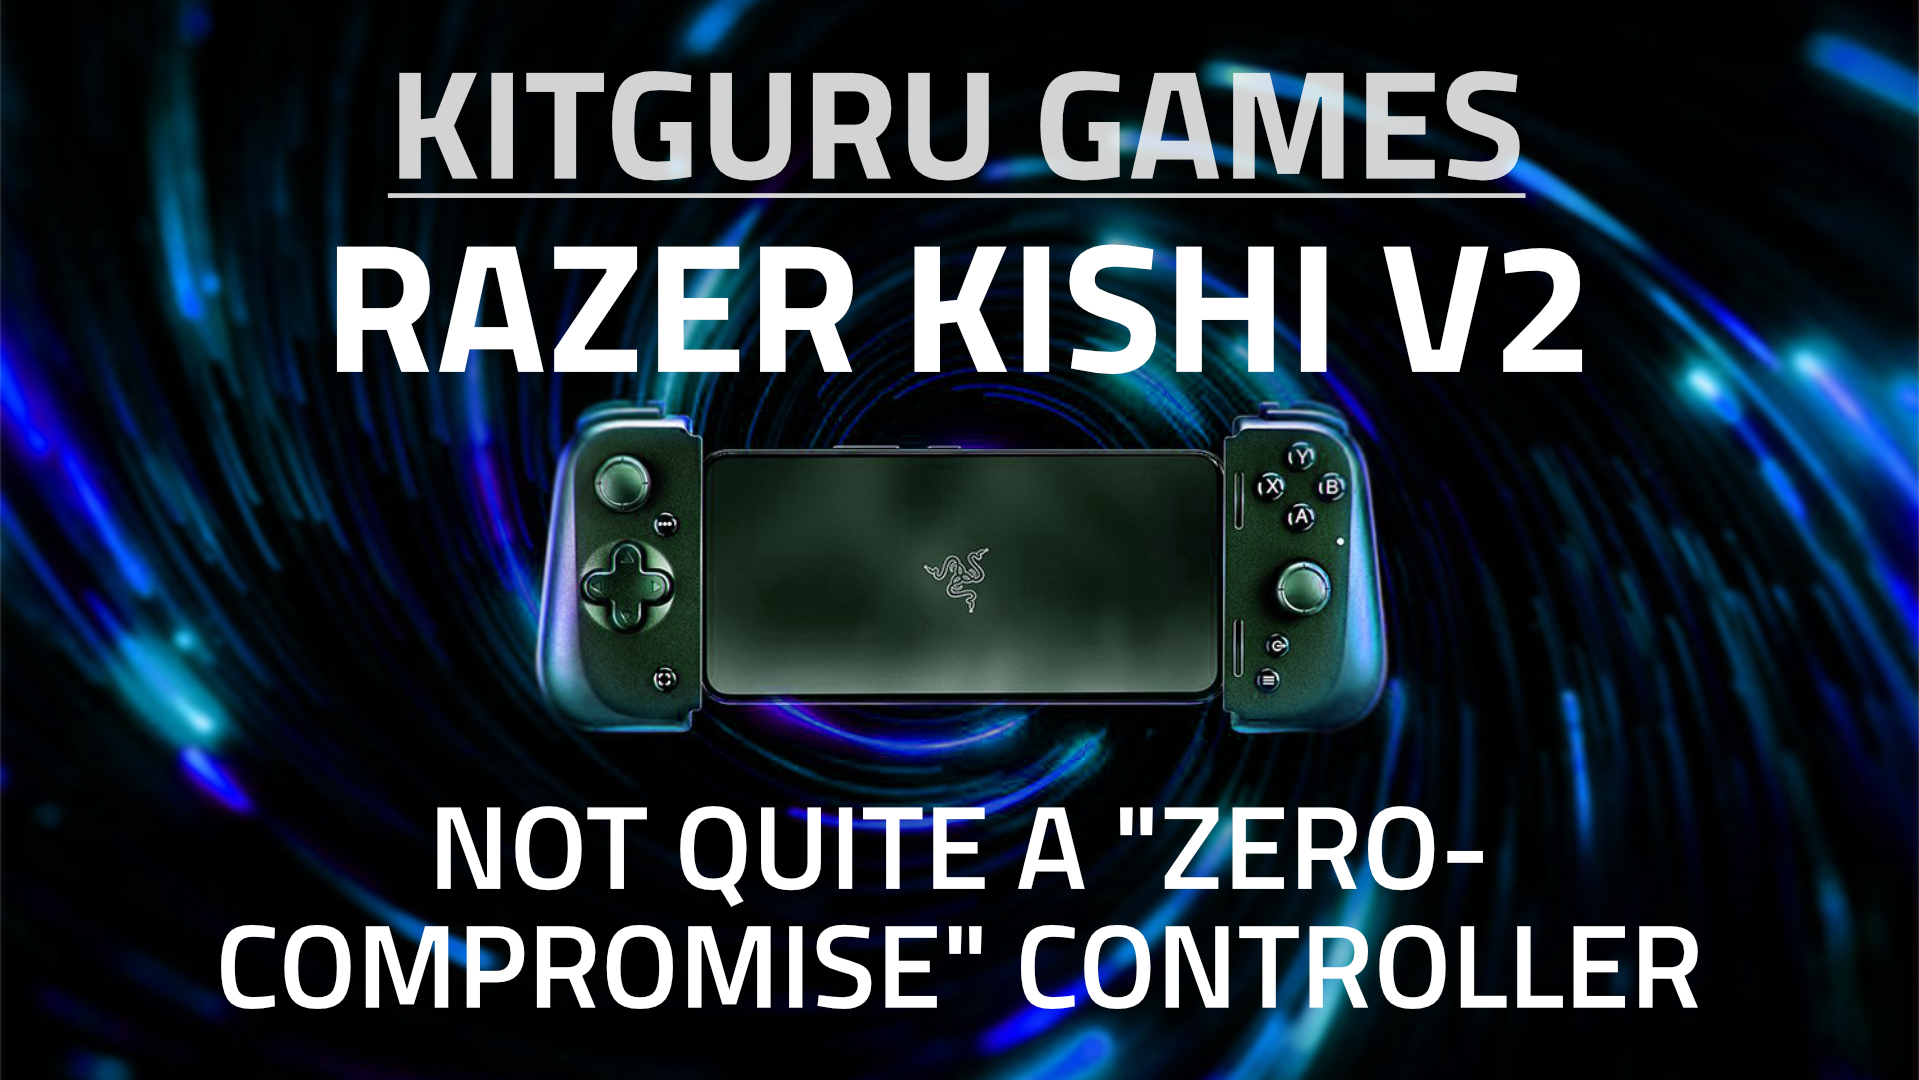 The Razer Kishi V2 for Android - console quality controls for